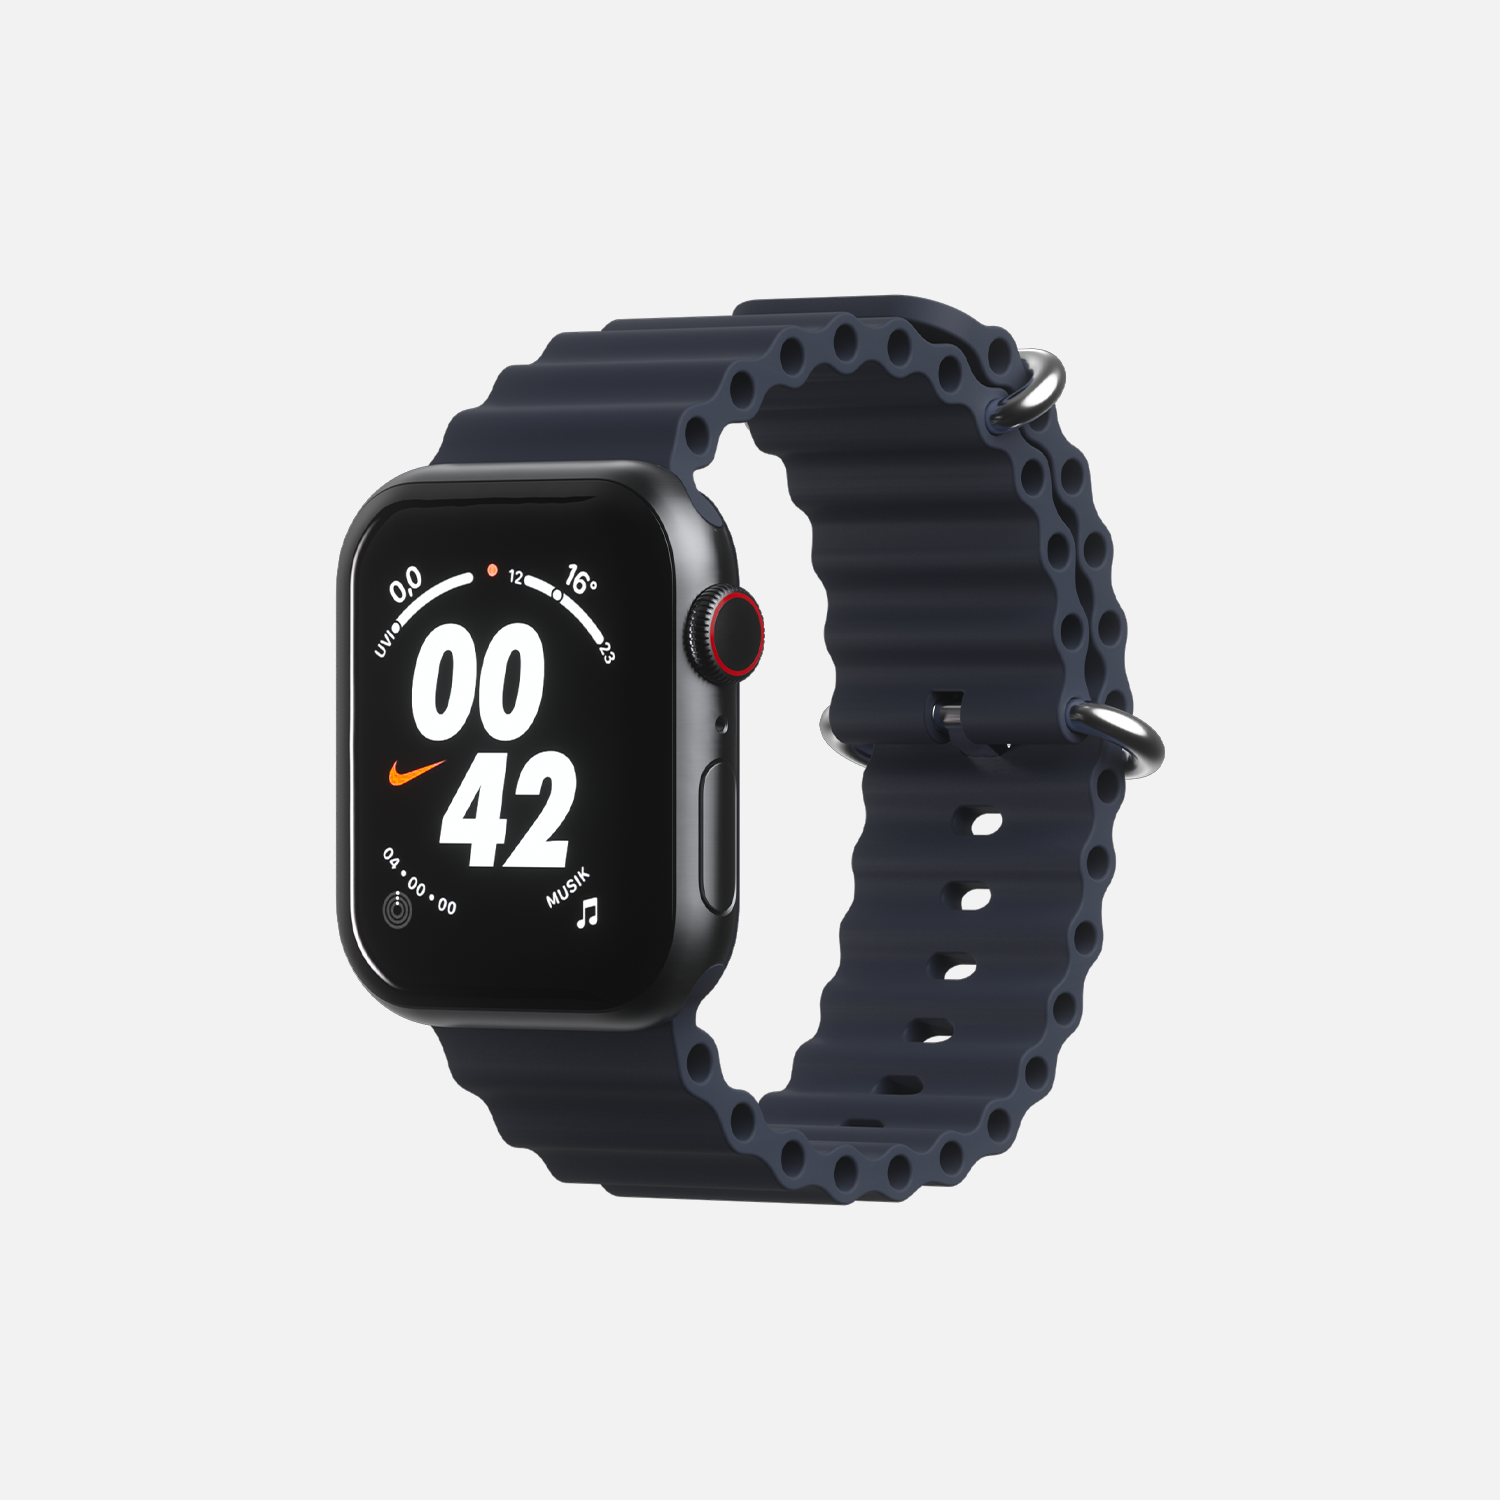 Apple Smartwatch with black sport band and digital watch face displaying time and fitness tracker.